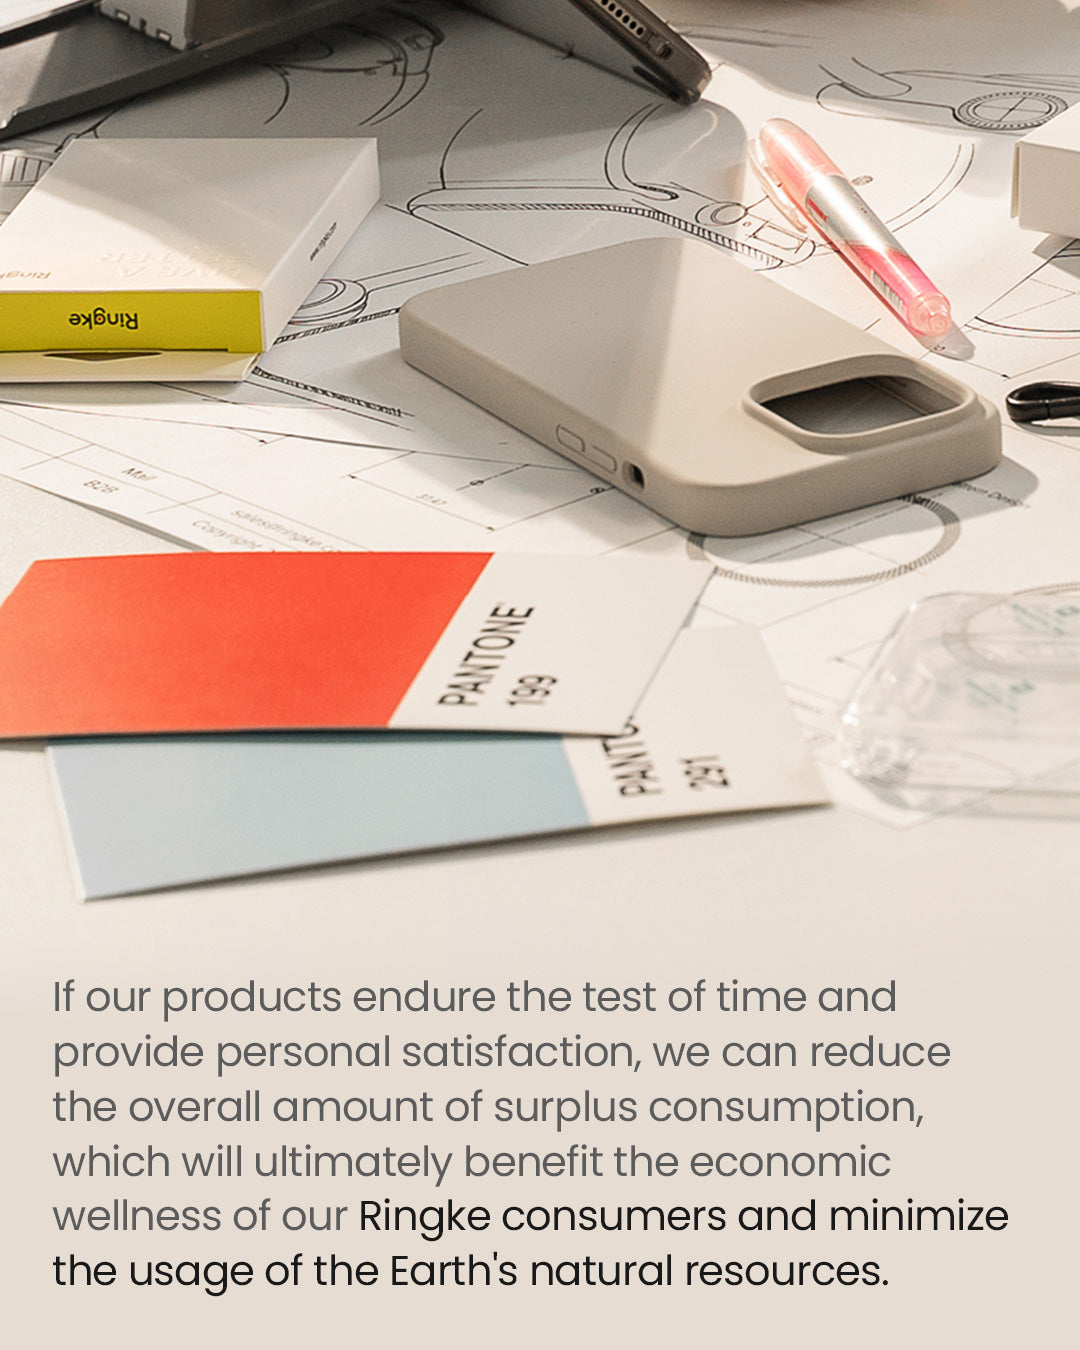 If our products ensure the test of time and provide personal satisfaction, we can reduce the overall amount of surplus consumption, which will ultimately benefit the economic wellness of our Ringke consumers and minimize the usage the Earth's natural resources.